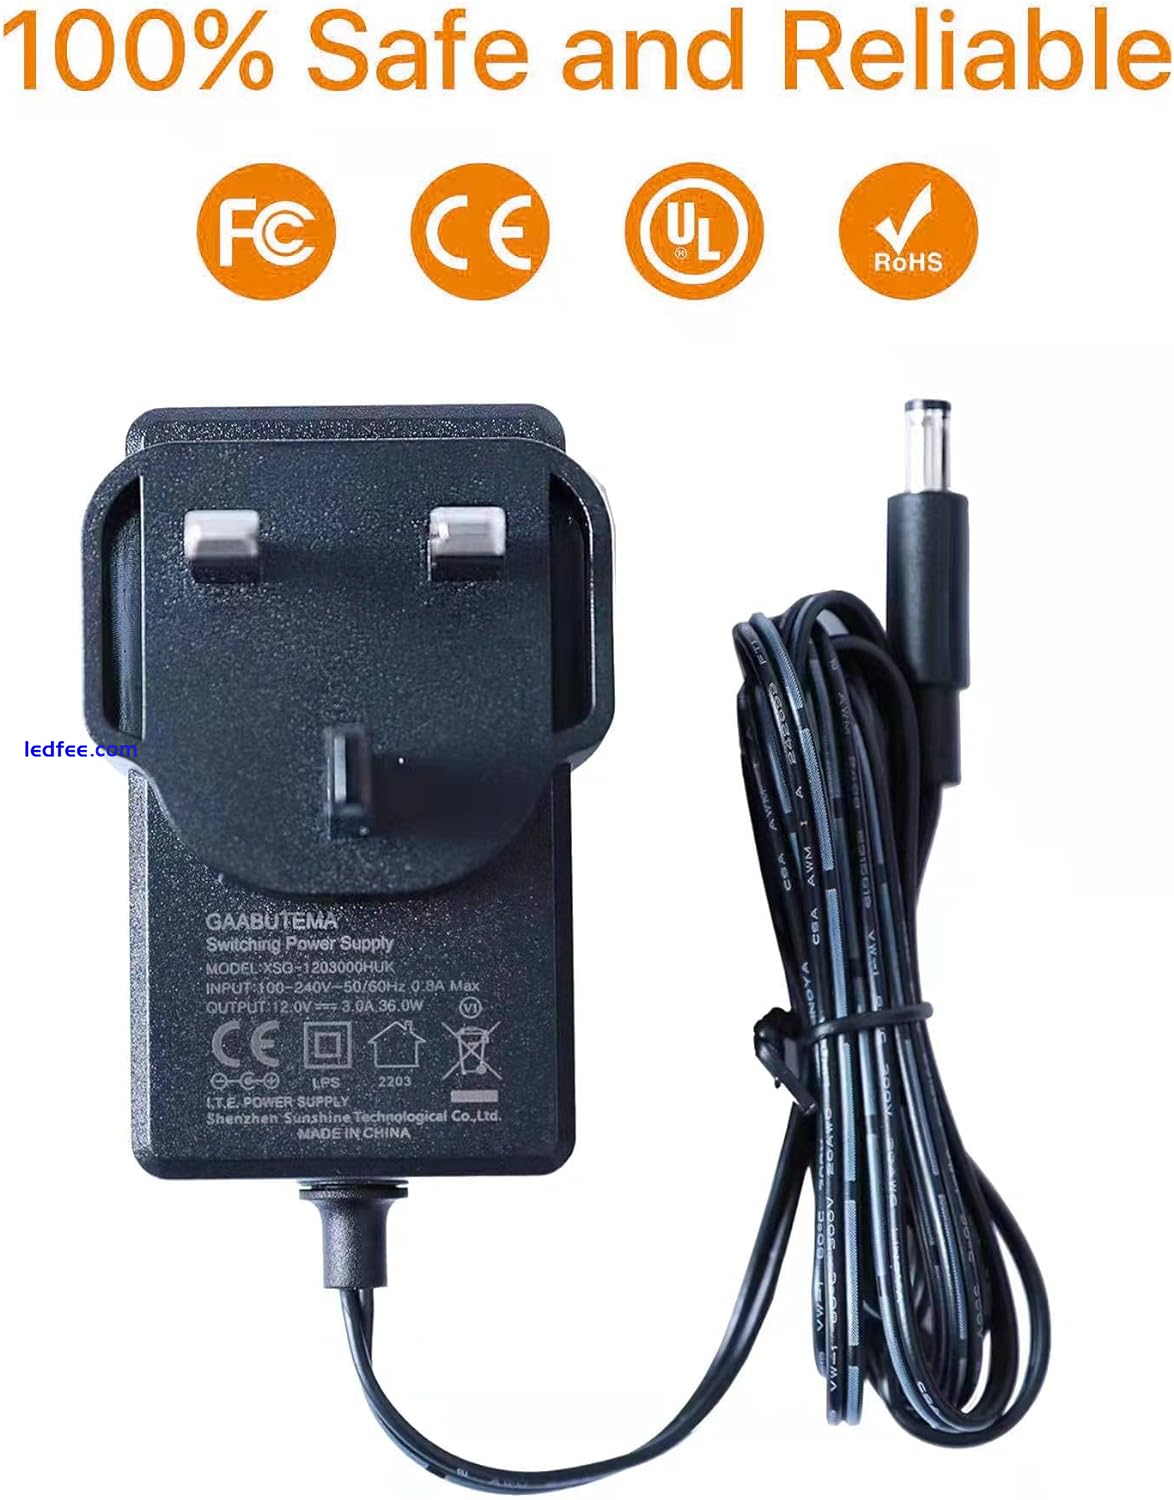 Power Supply Adapter, 12V 3A DC Power Supply Adapter for LED Neon Strip Lights, 2 